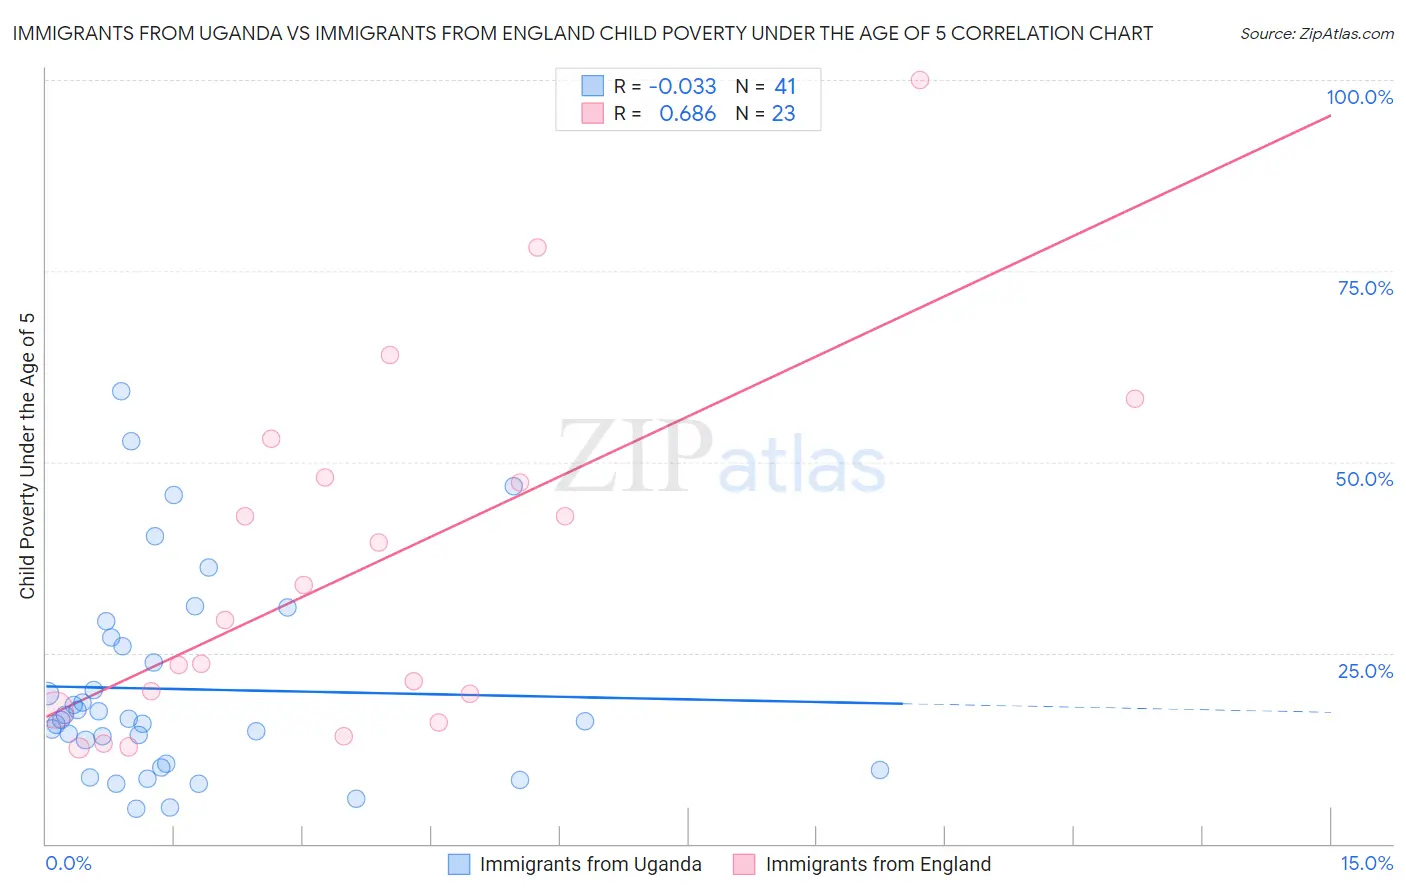 Immigrants from Uganda vs Immigrants from England Child Poverty Under the Age of 5